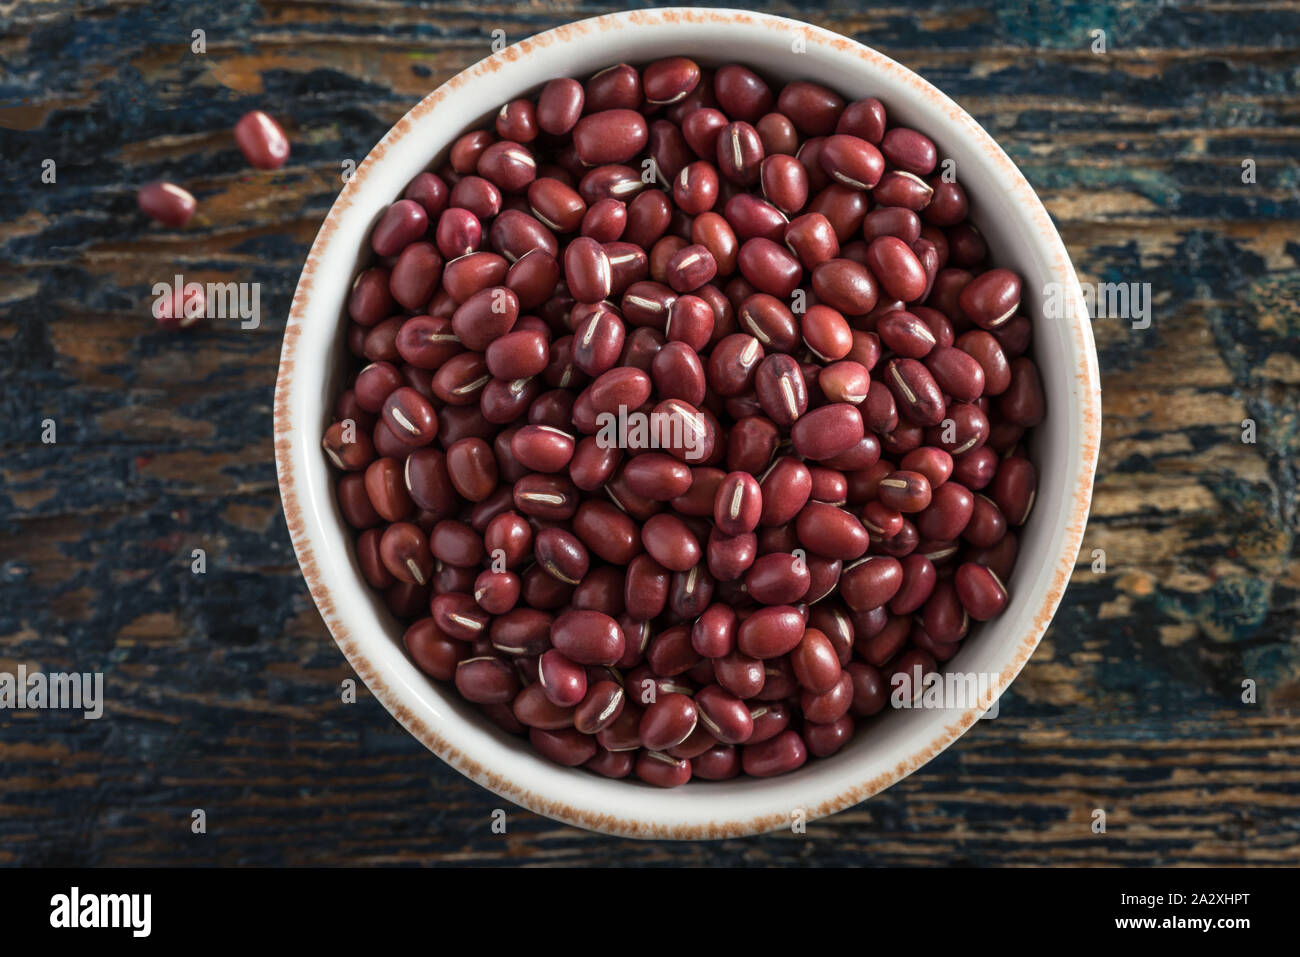 Uncooked Adzuki Beans in a Bowl Stock Photo